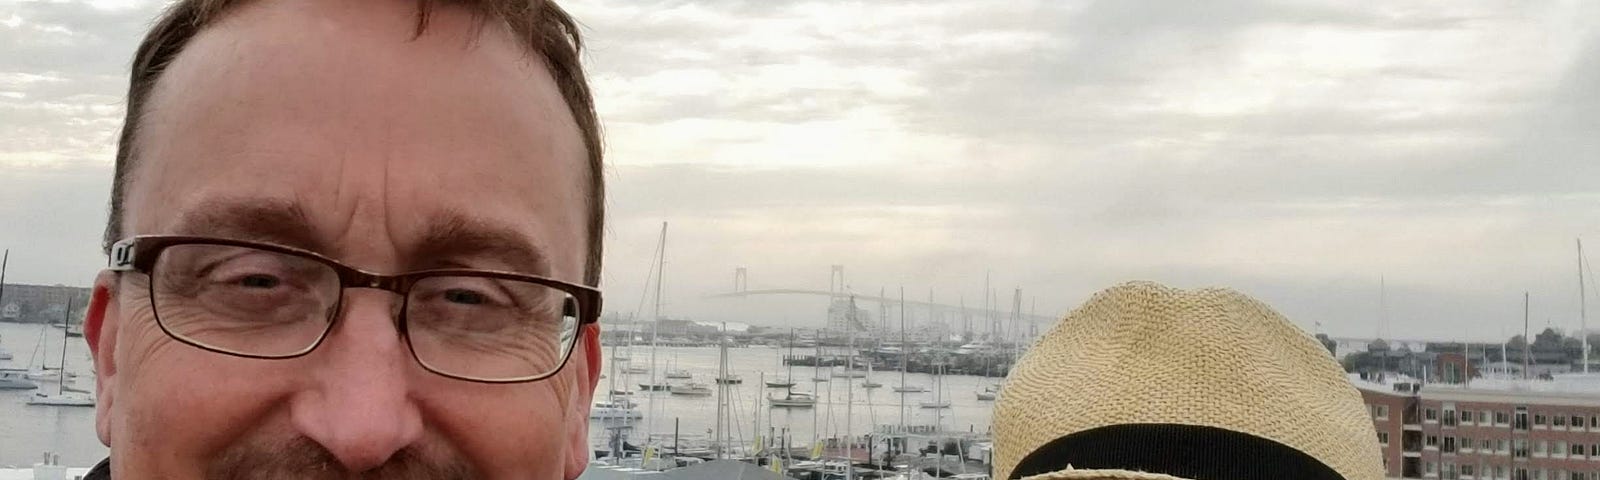 D and I on our Newport, Rhode Island hotel roof, overlooking the marina around sunset